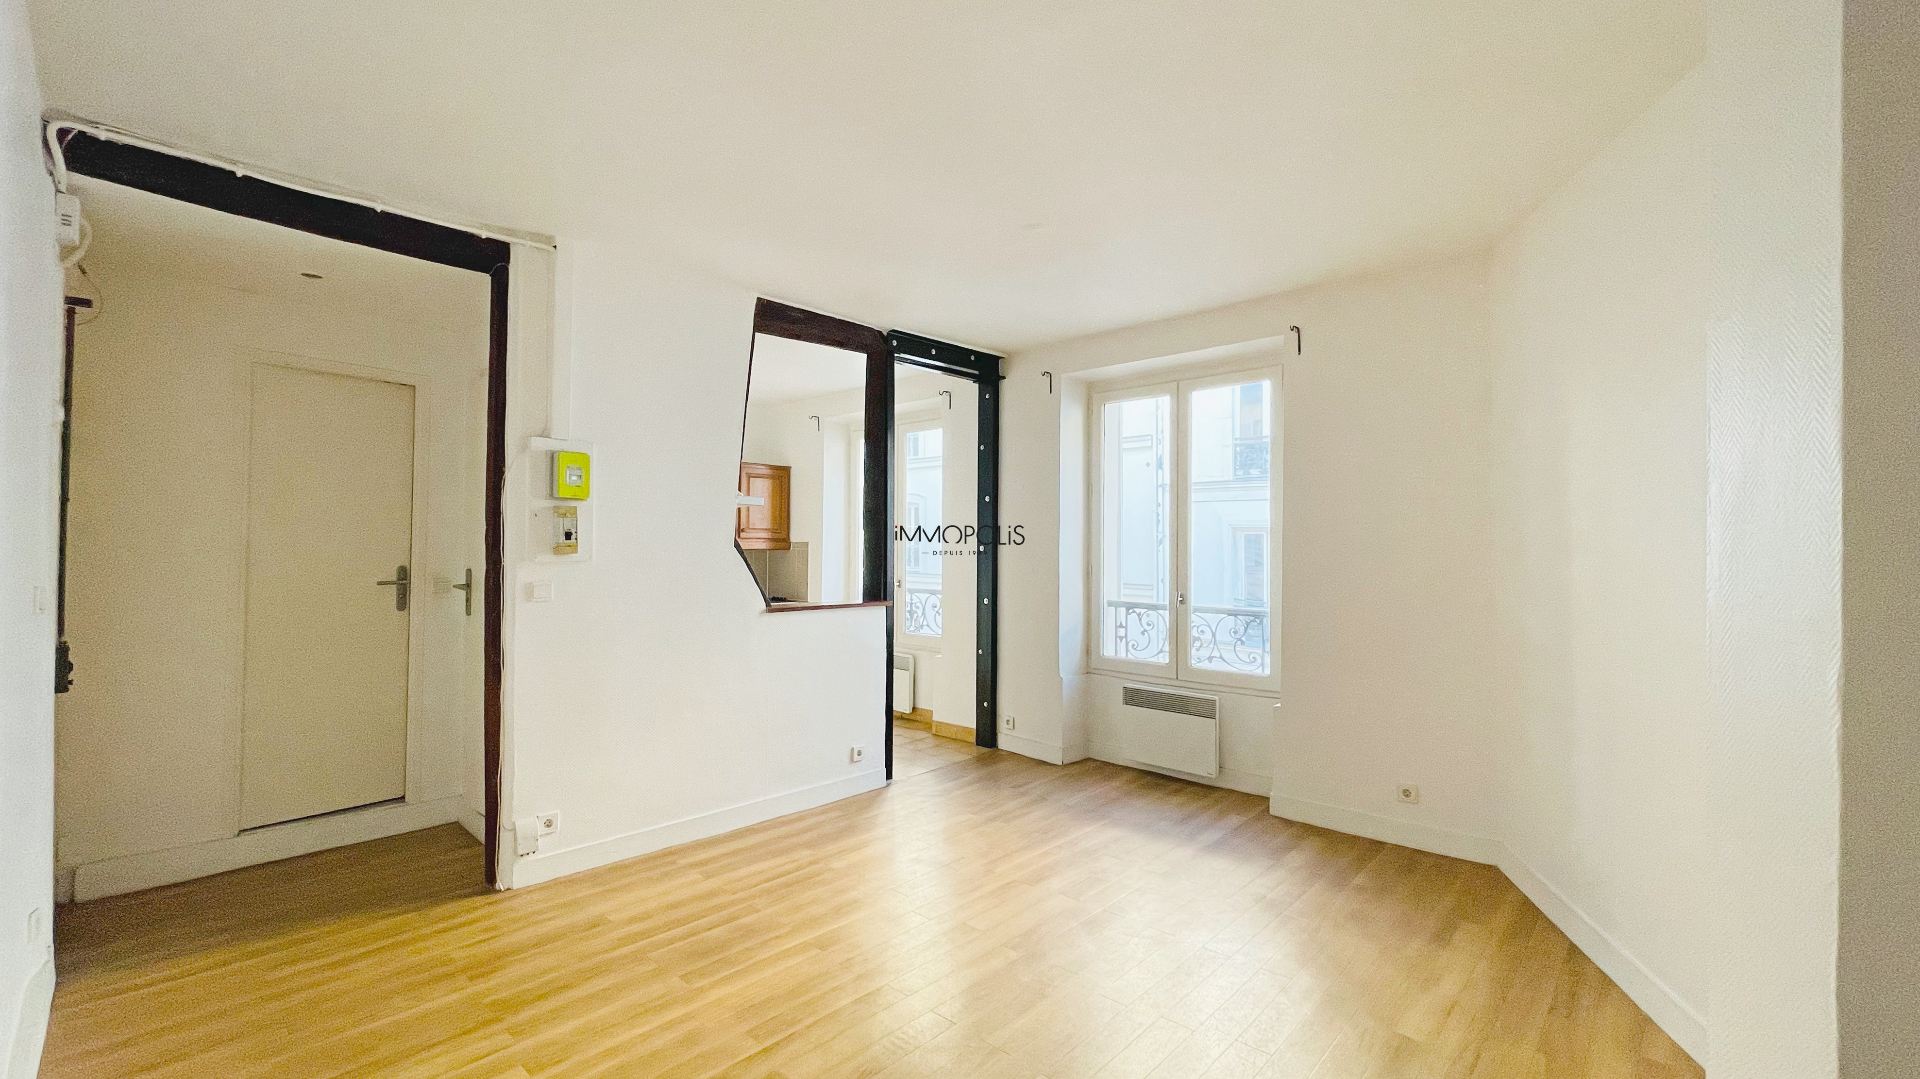 Beautiful studio in Montmartre, 30 m² without loss of space located in a rebuilded building 1